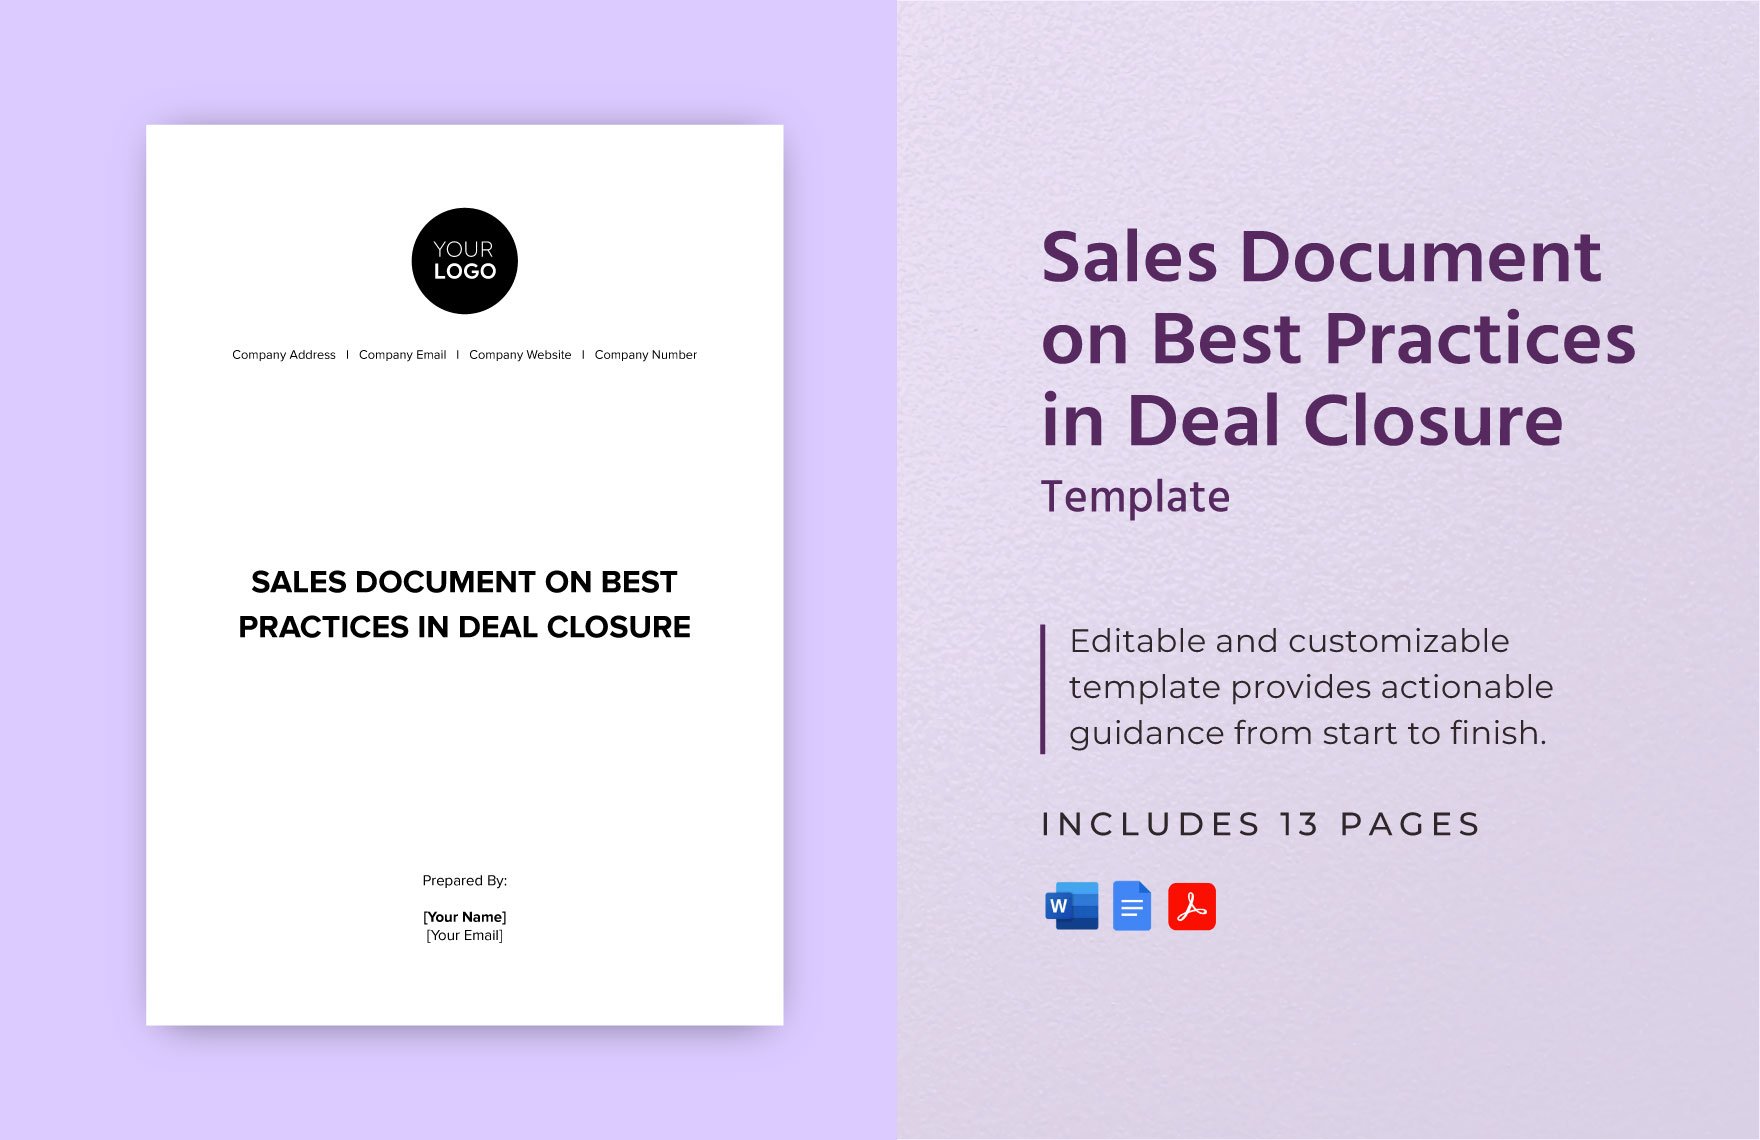 Sales Document on Best Practices in Deal Closure Template in Word, Google Docs, PDF